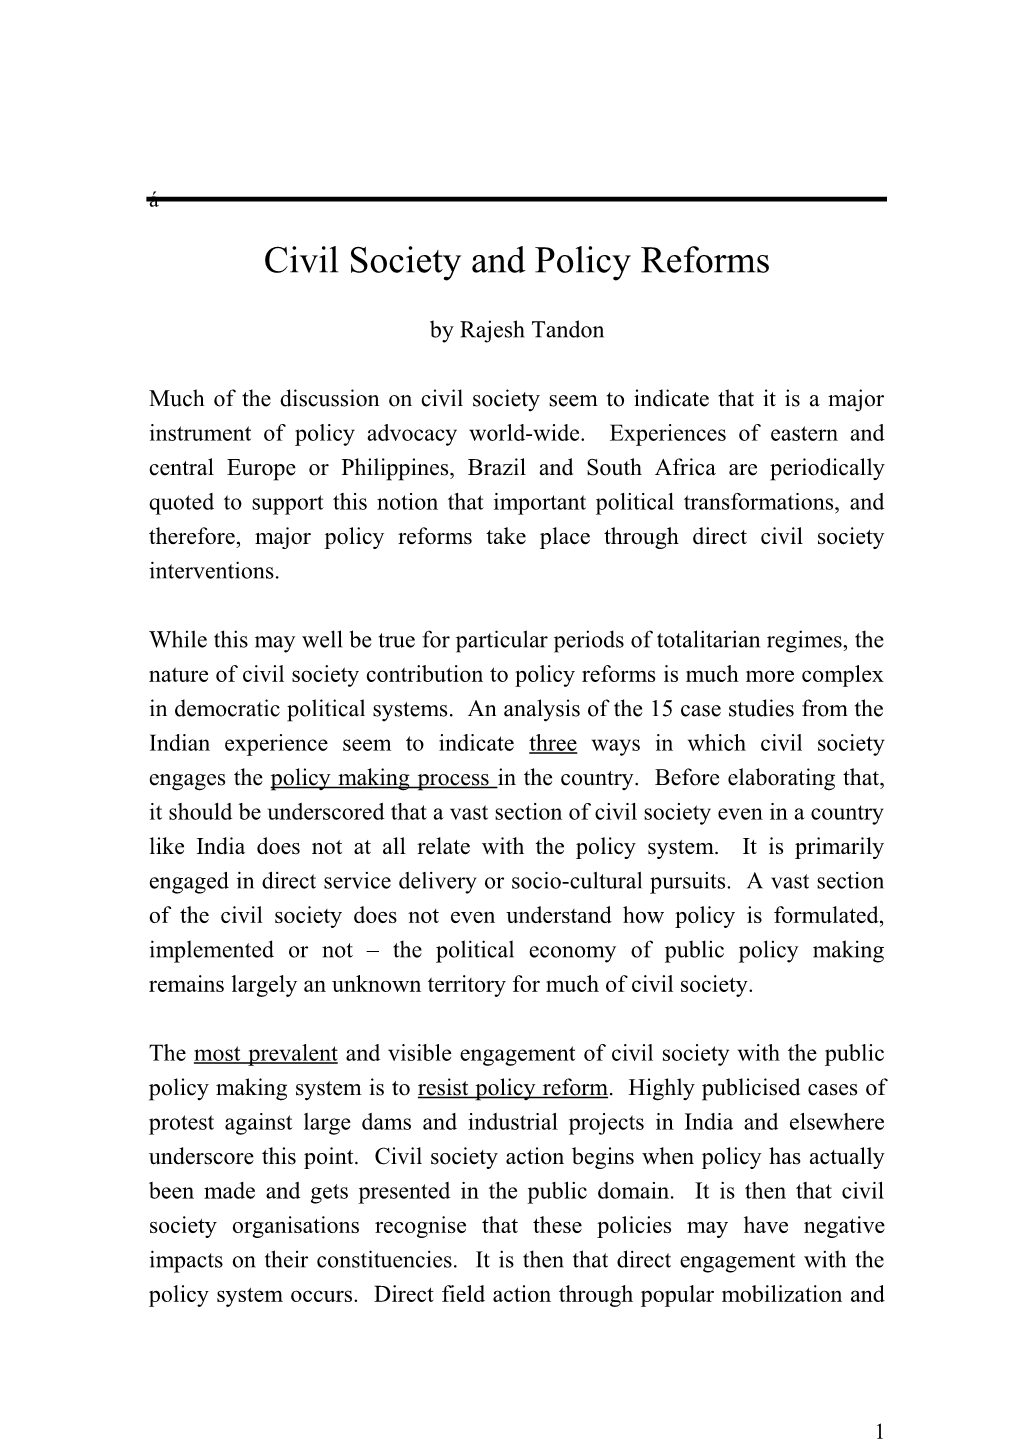 Civil Society and Policy Reforms